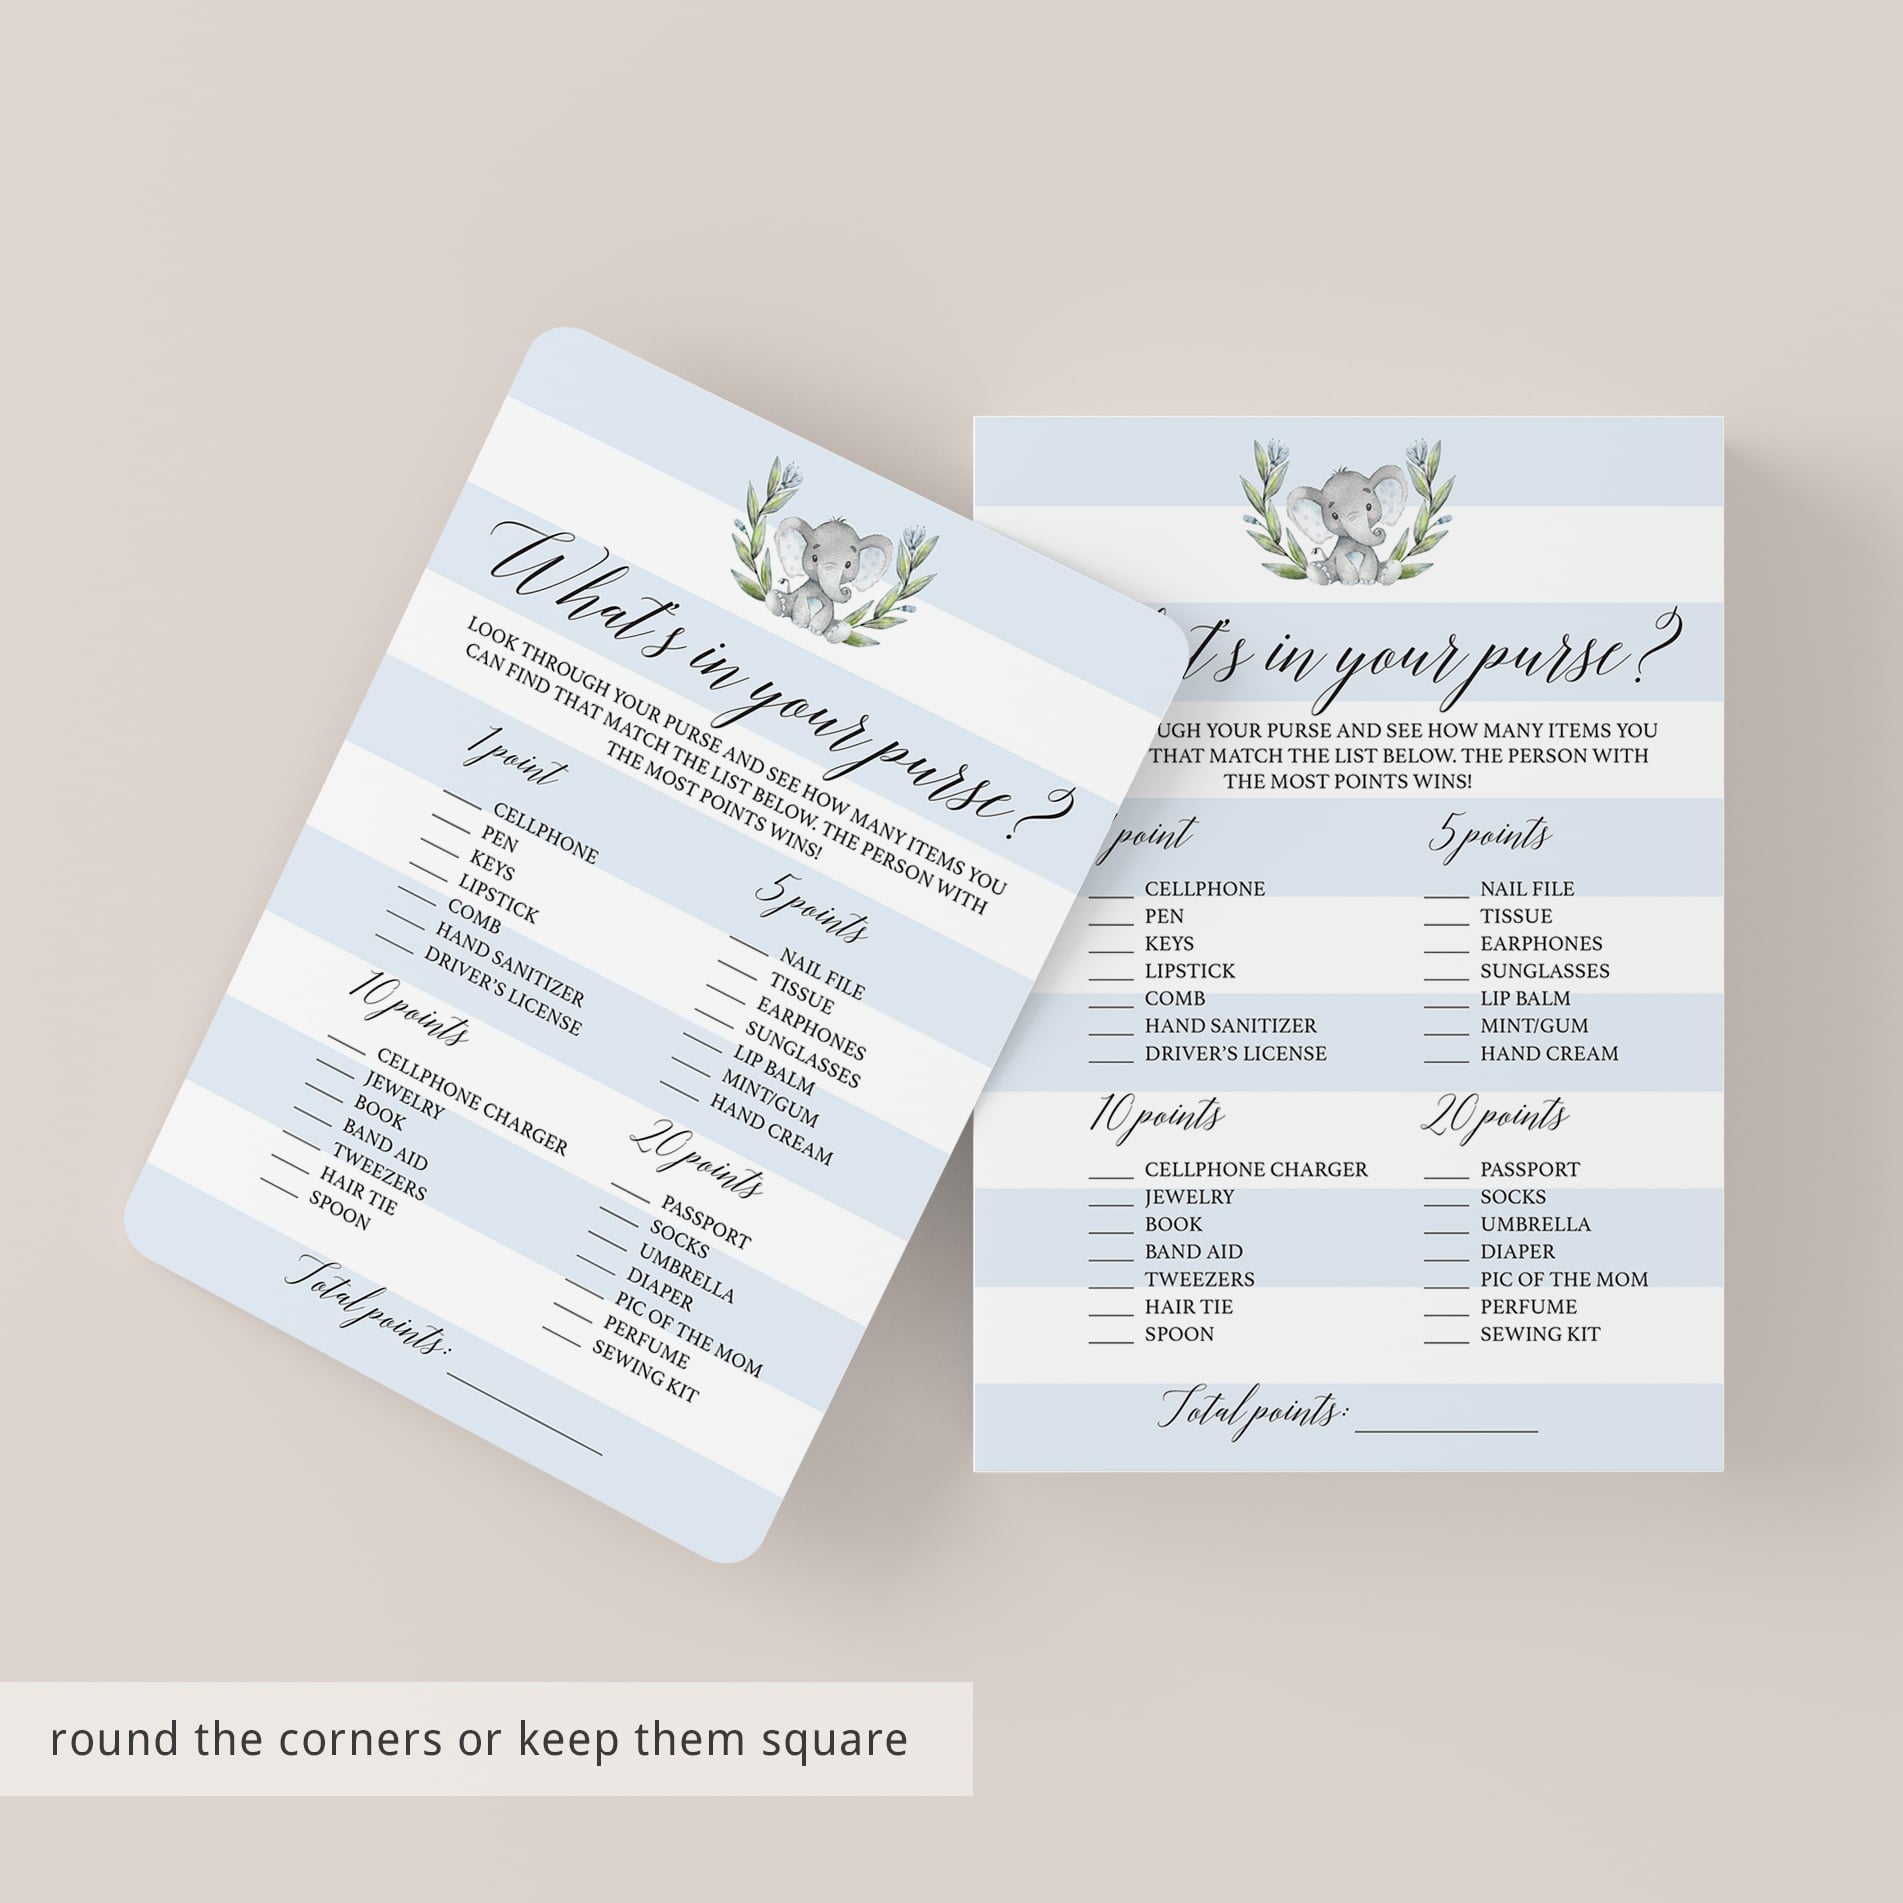 Popular baby shower game cards what's in your bag by LittleSizzle